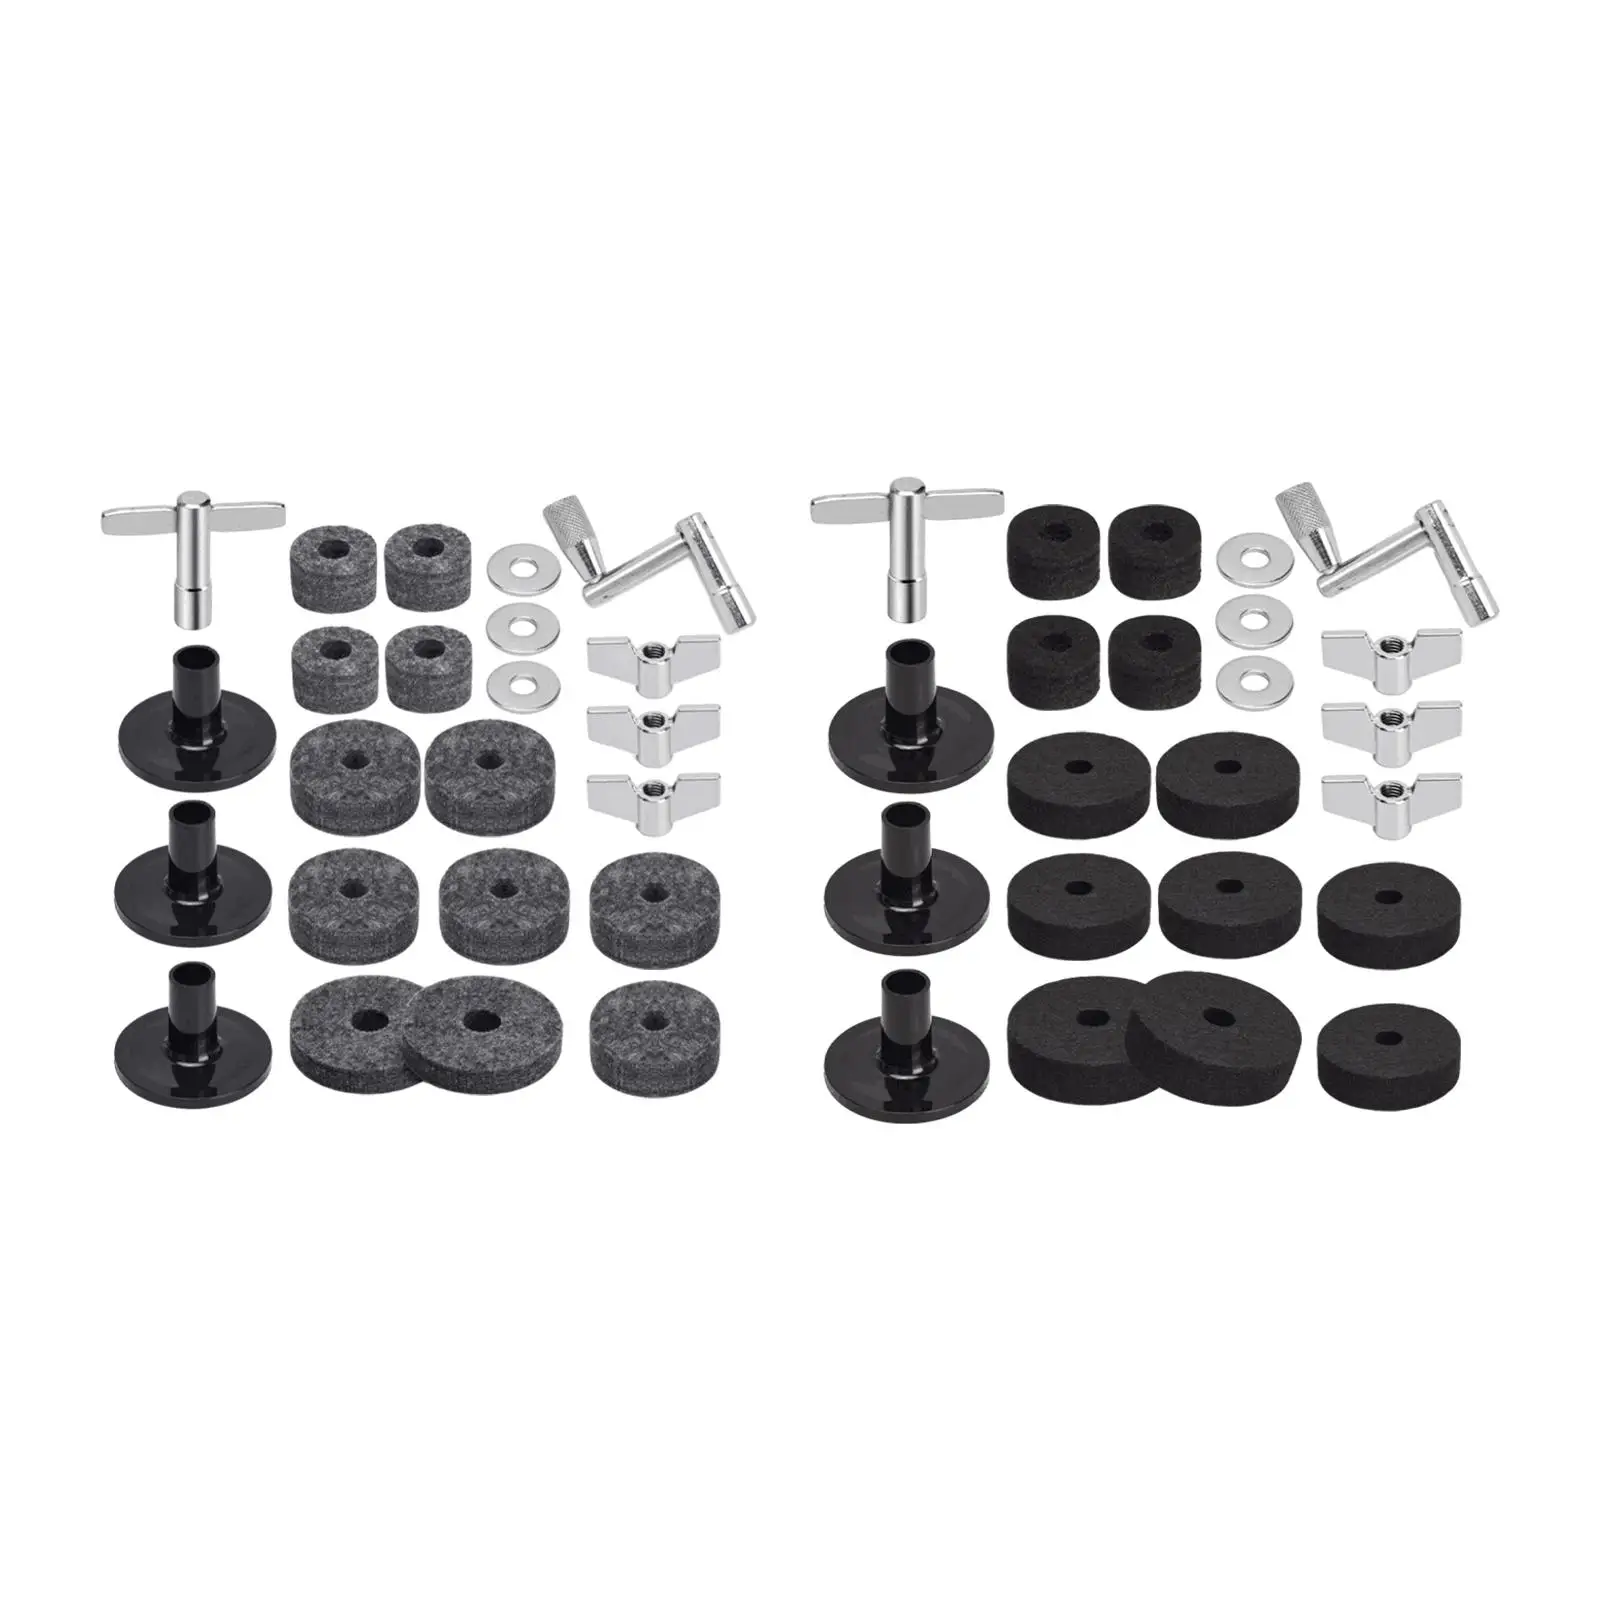 23 Pieces Drum Cymbal Felt Pads Cymbal Stand Felts for Shelf Drum Kits